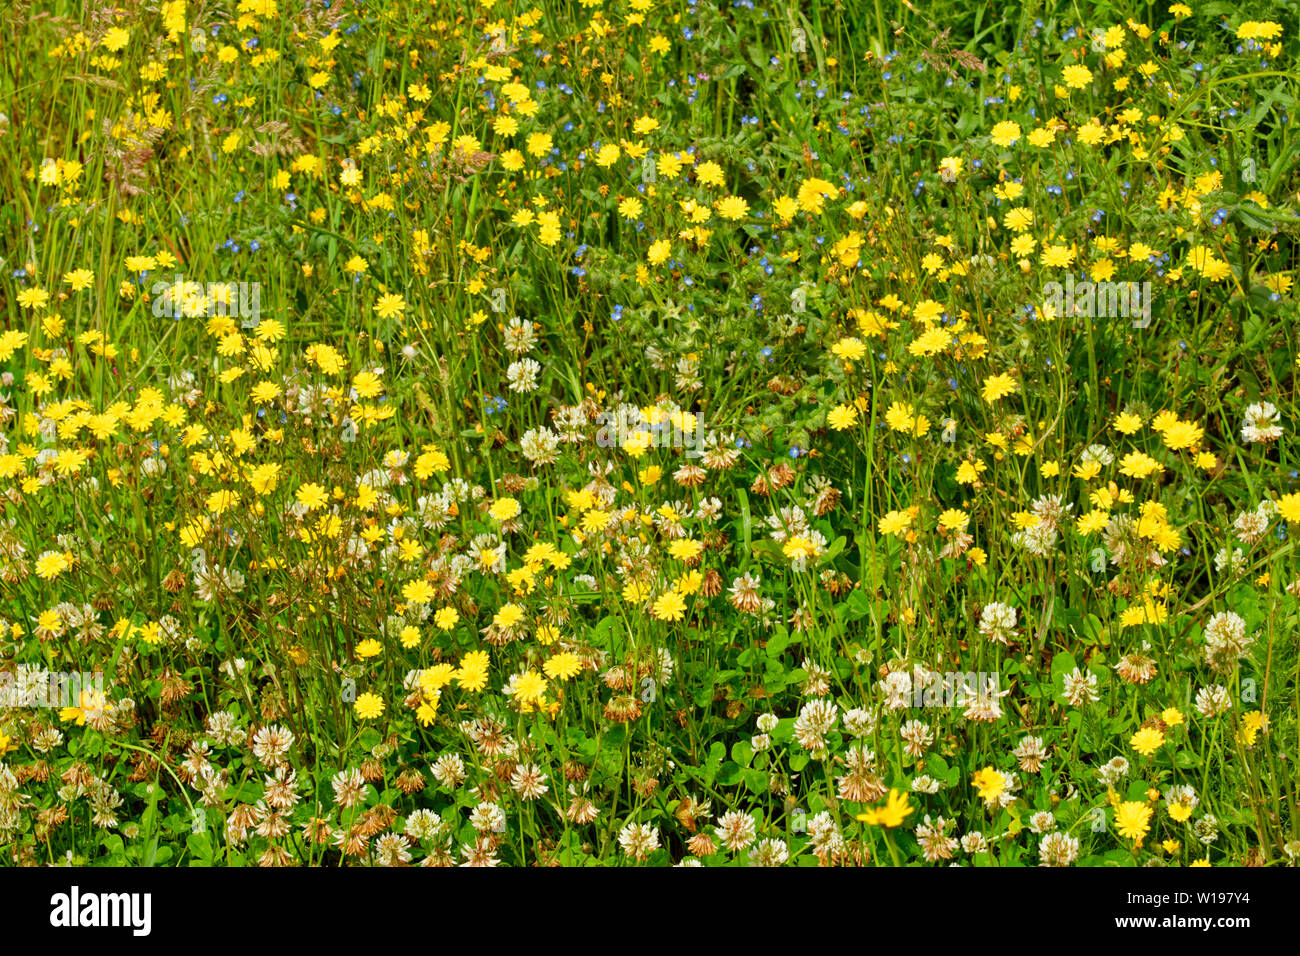 RIVER FINDHORN SCOTLAND WILD FLOWERS IN SUMMER THE YELLOW FLOWERS OF SMOOTH HAWKS-BEARD Crepis capillaris AND WHITE CLOVER Trifolium repens Stock Photo